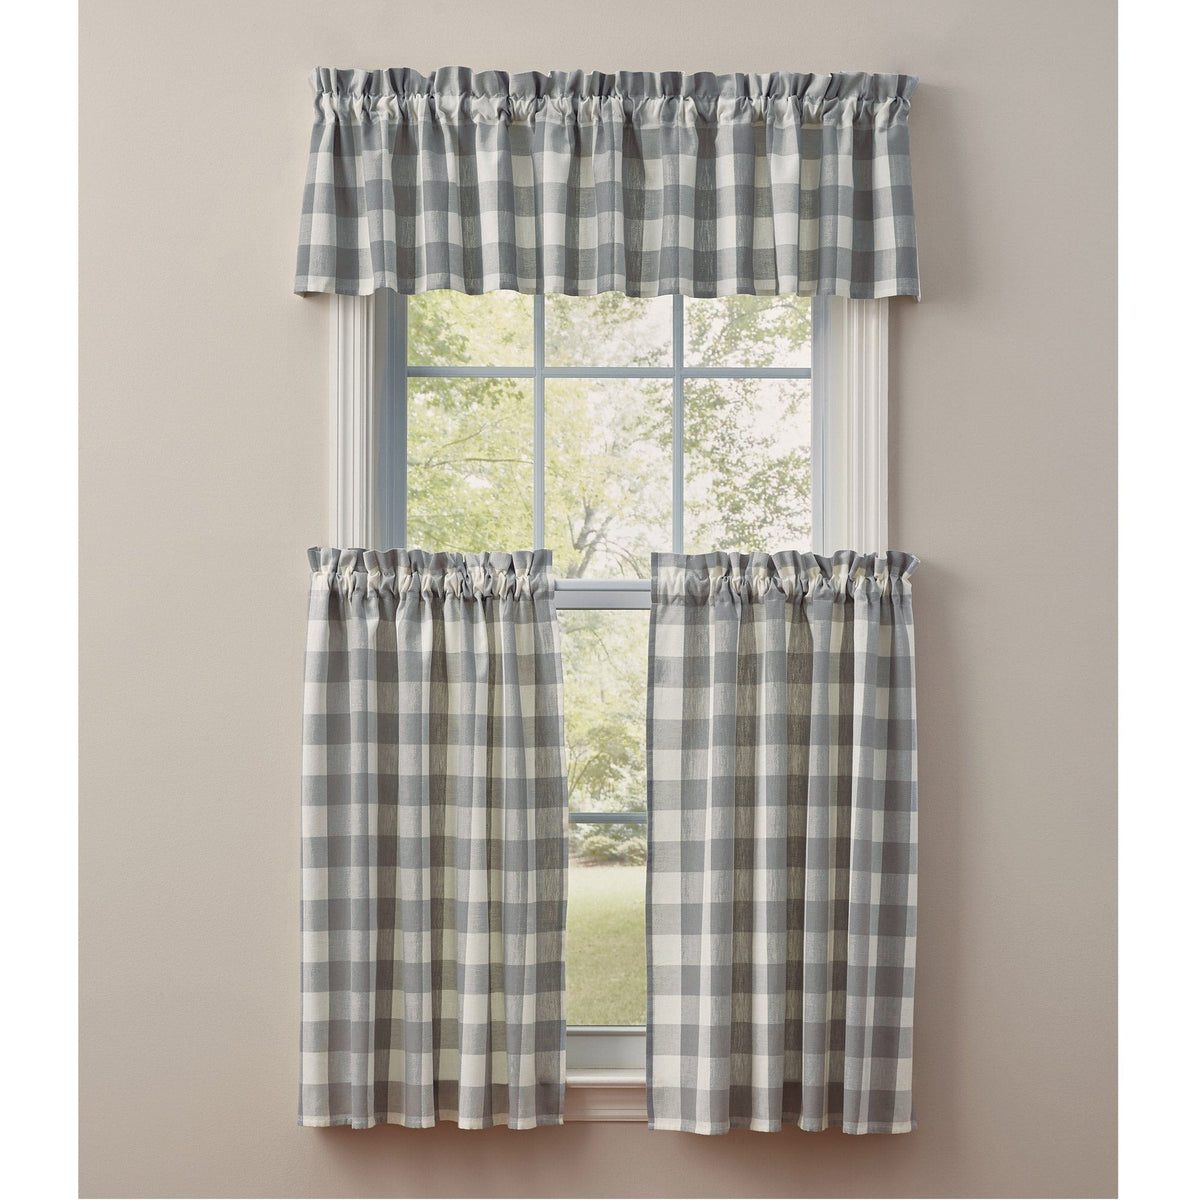 Wicklow in Dove Valance Unlined-Park Designs-The Village Merchant